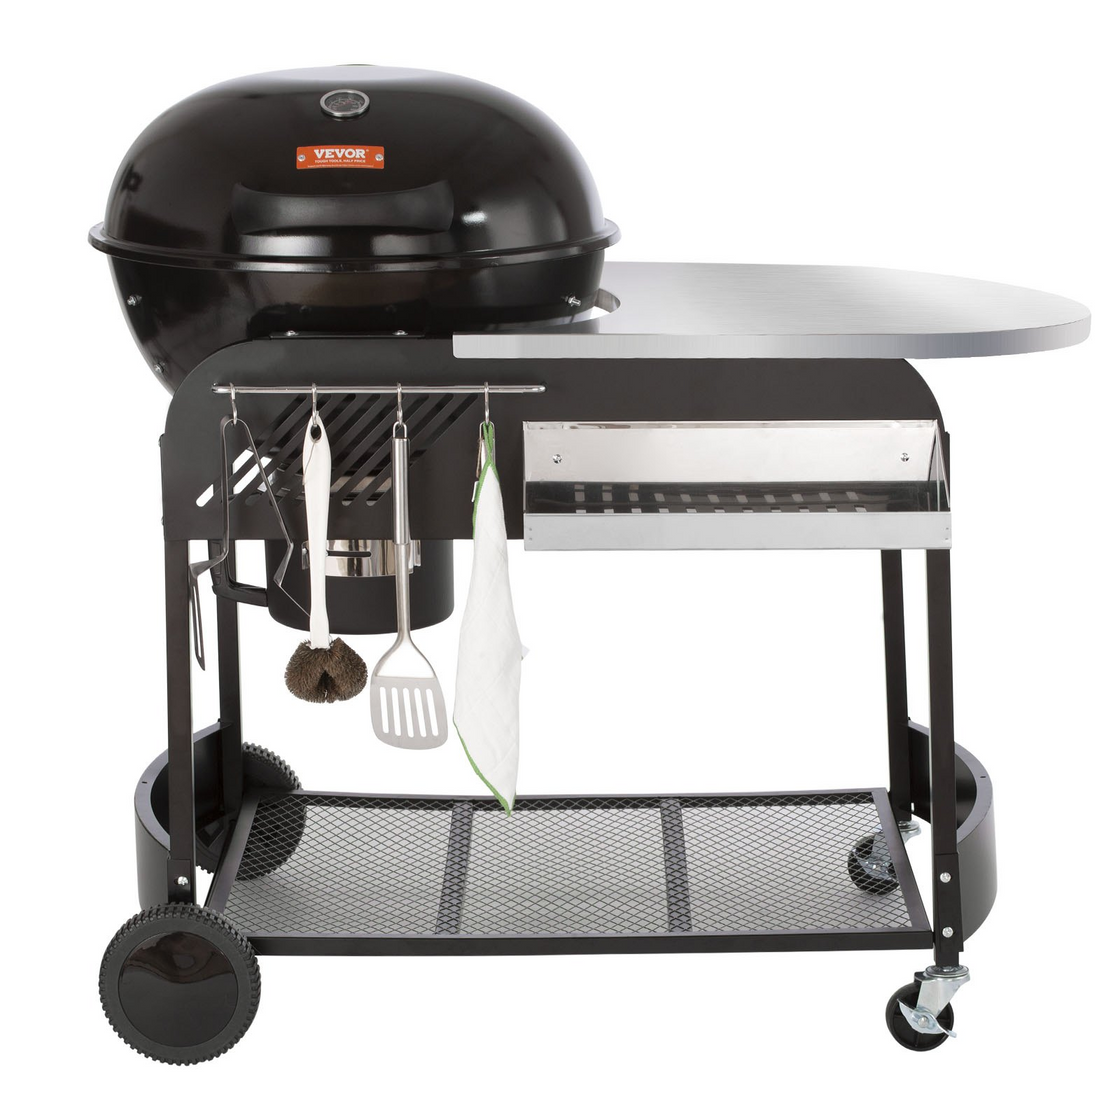 VEVOR 21-inch Kettle Charcoal Grill BBQ Portable Grill with Cart | Outdoor Cooking